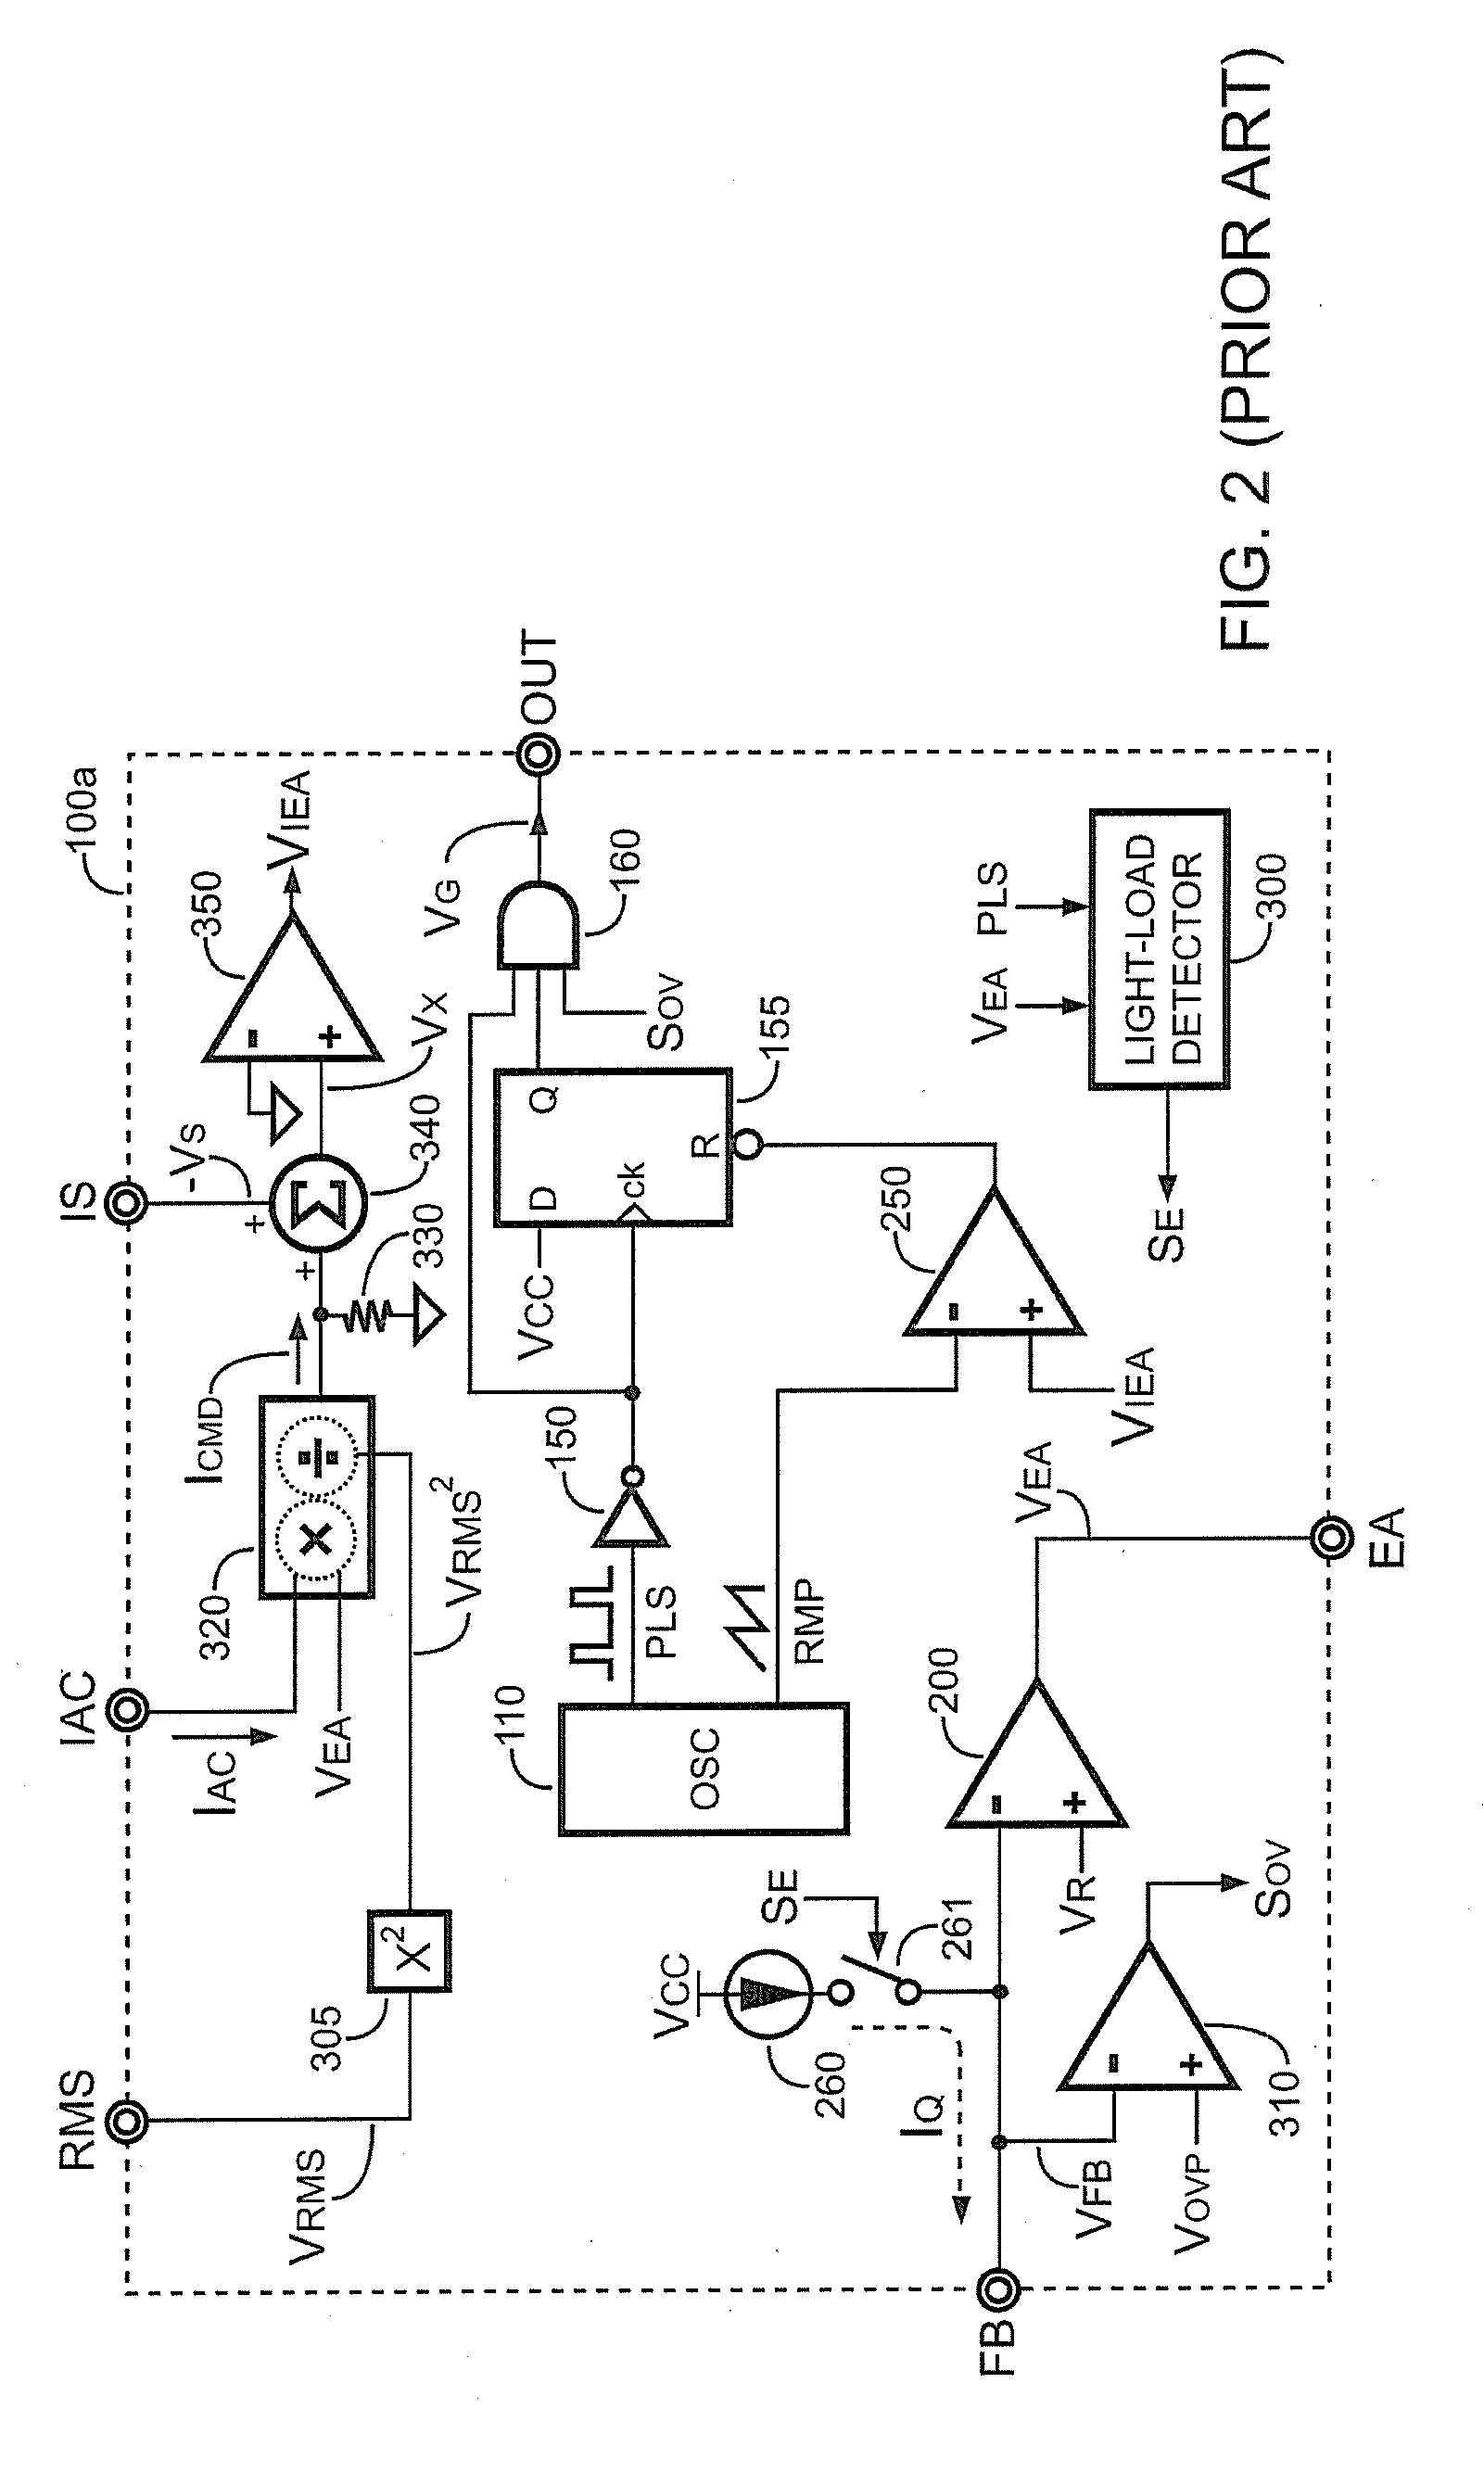 Pfc converter having two-level output voltage without voltage undershooting